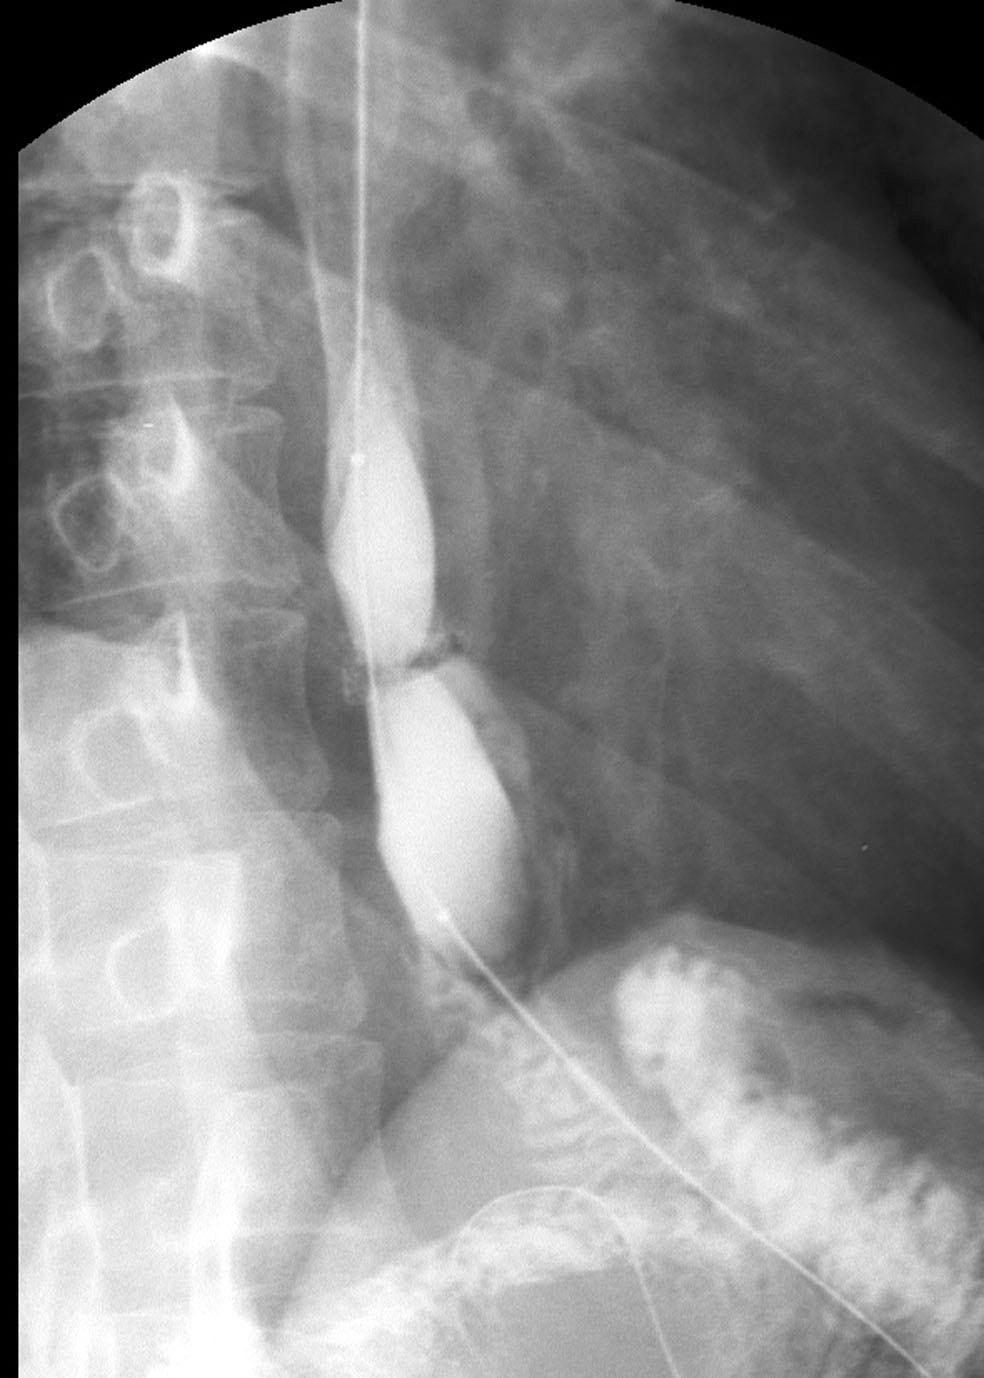 20-mm-diameter balloon is placed and is inflated until waist forms by stricture disappeared.. Immediately after balloon dilation, stricture is greatly improved (arrow).